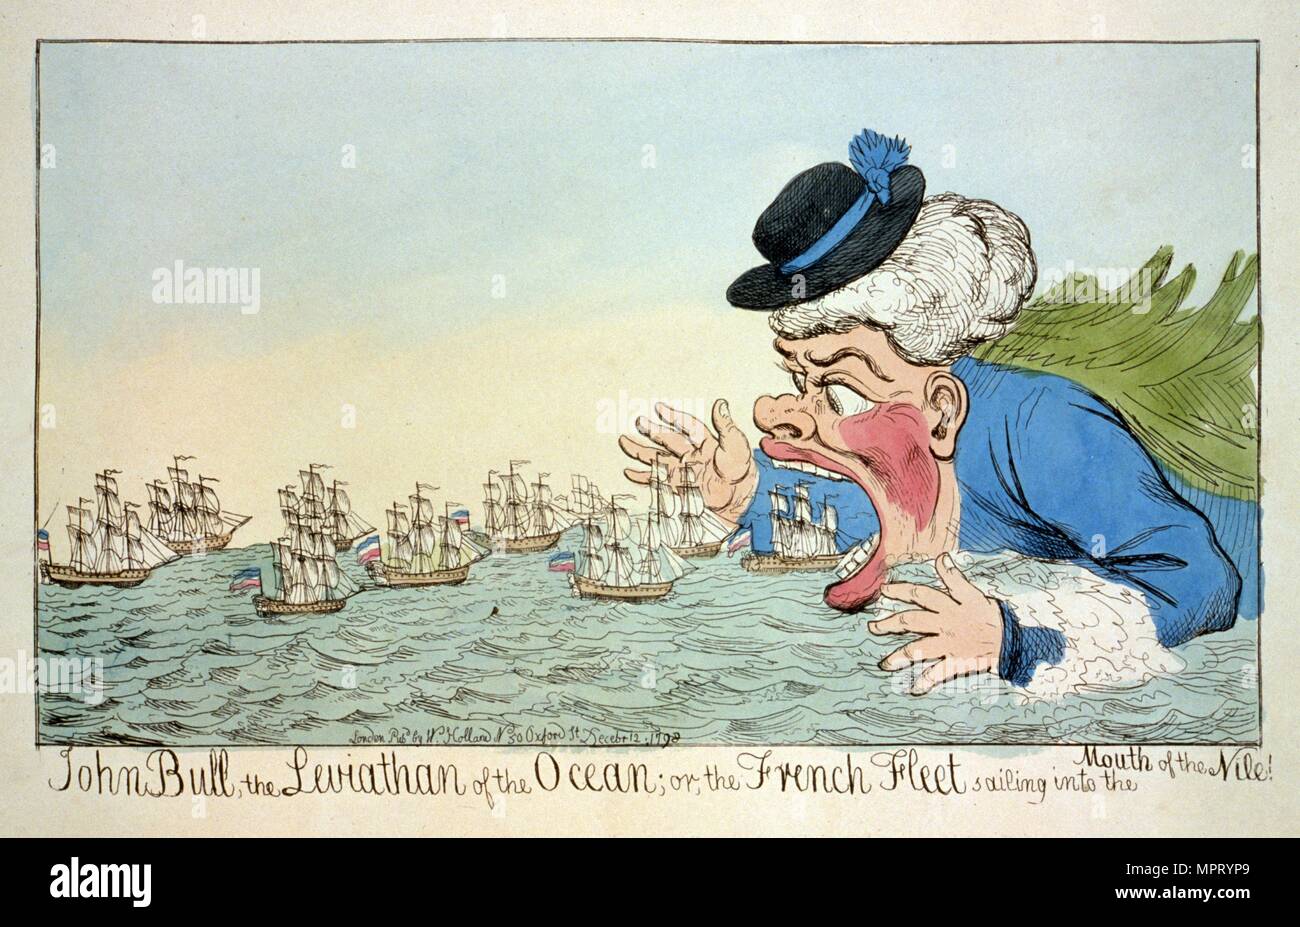 John Bull the Leviatan of the Ocean or the French Fleet sailing into the Mouth of the Nile December Stock Photo